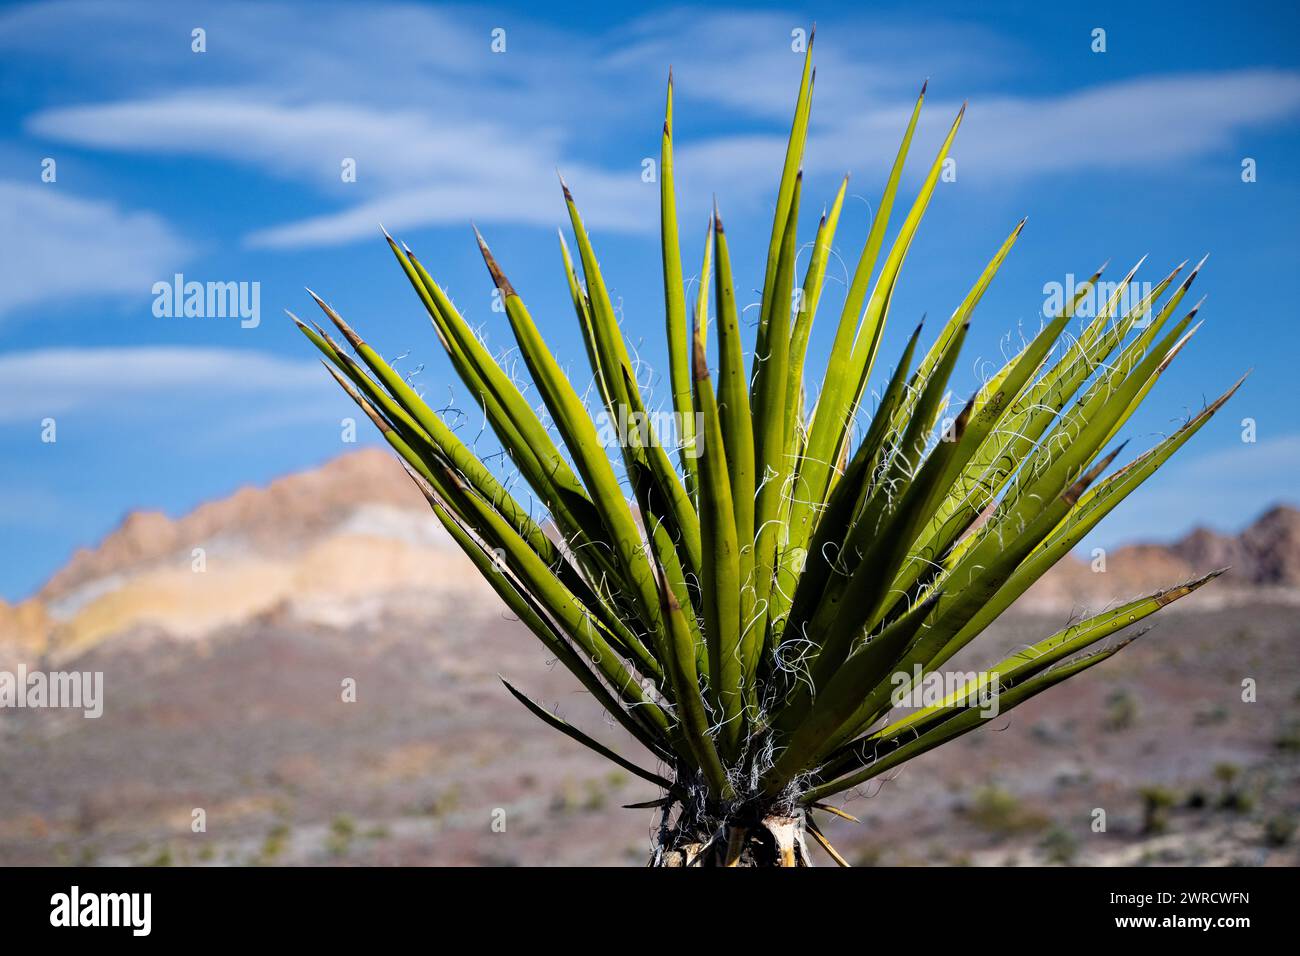 Yucca plant Mojave desert in Eldorado Valley with conglomerate sandstone landscape Stock Photo